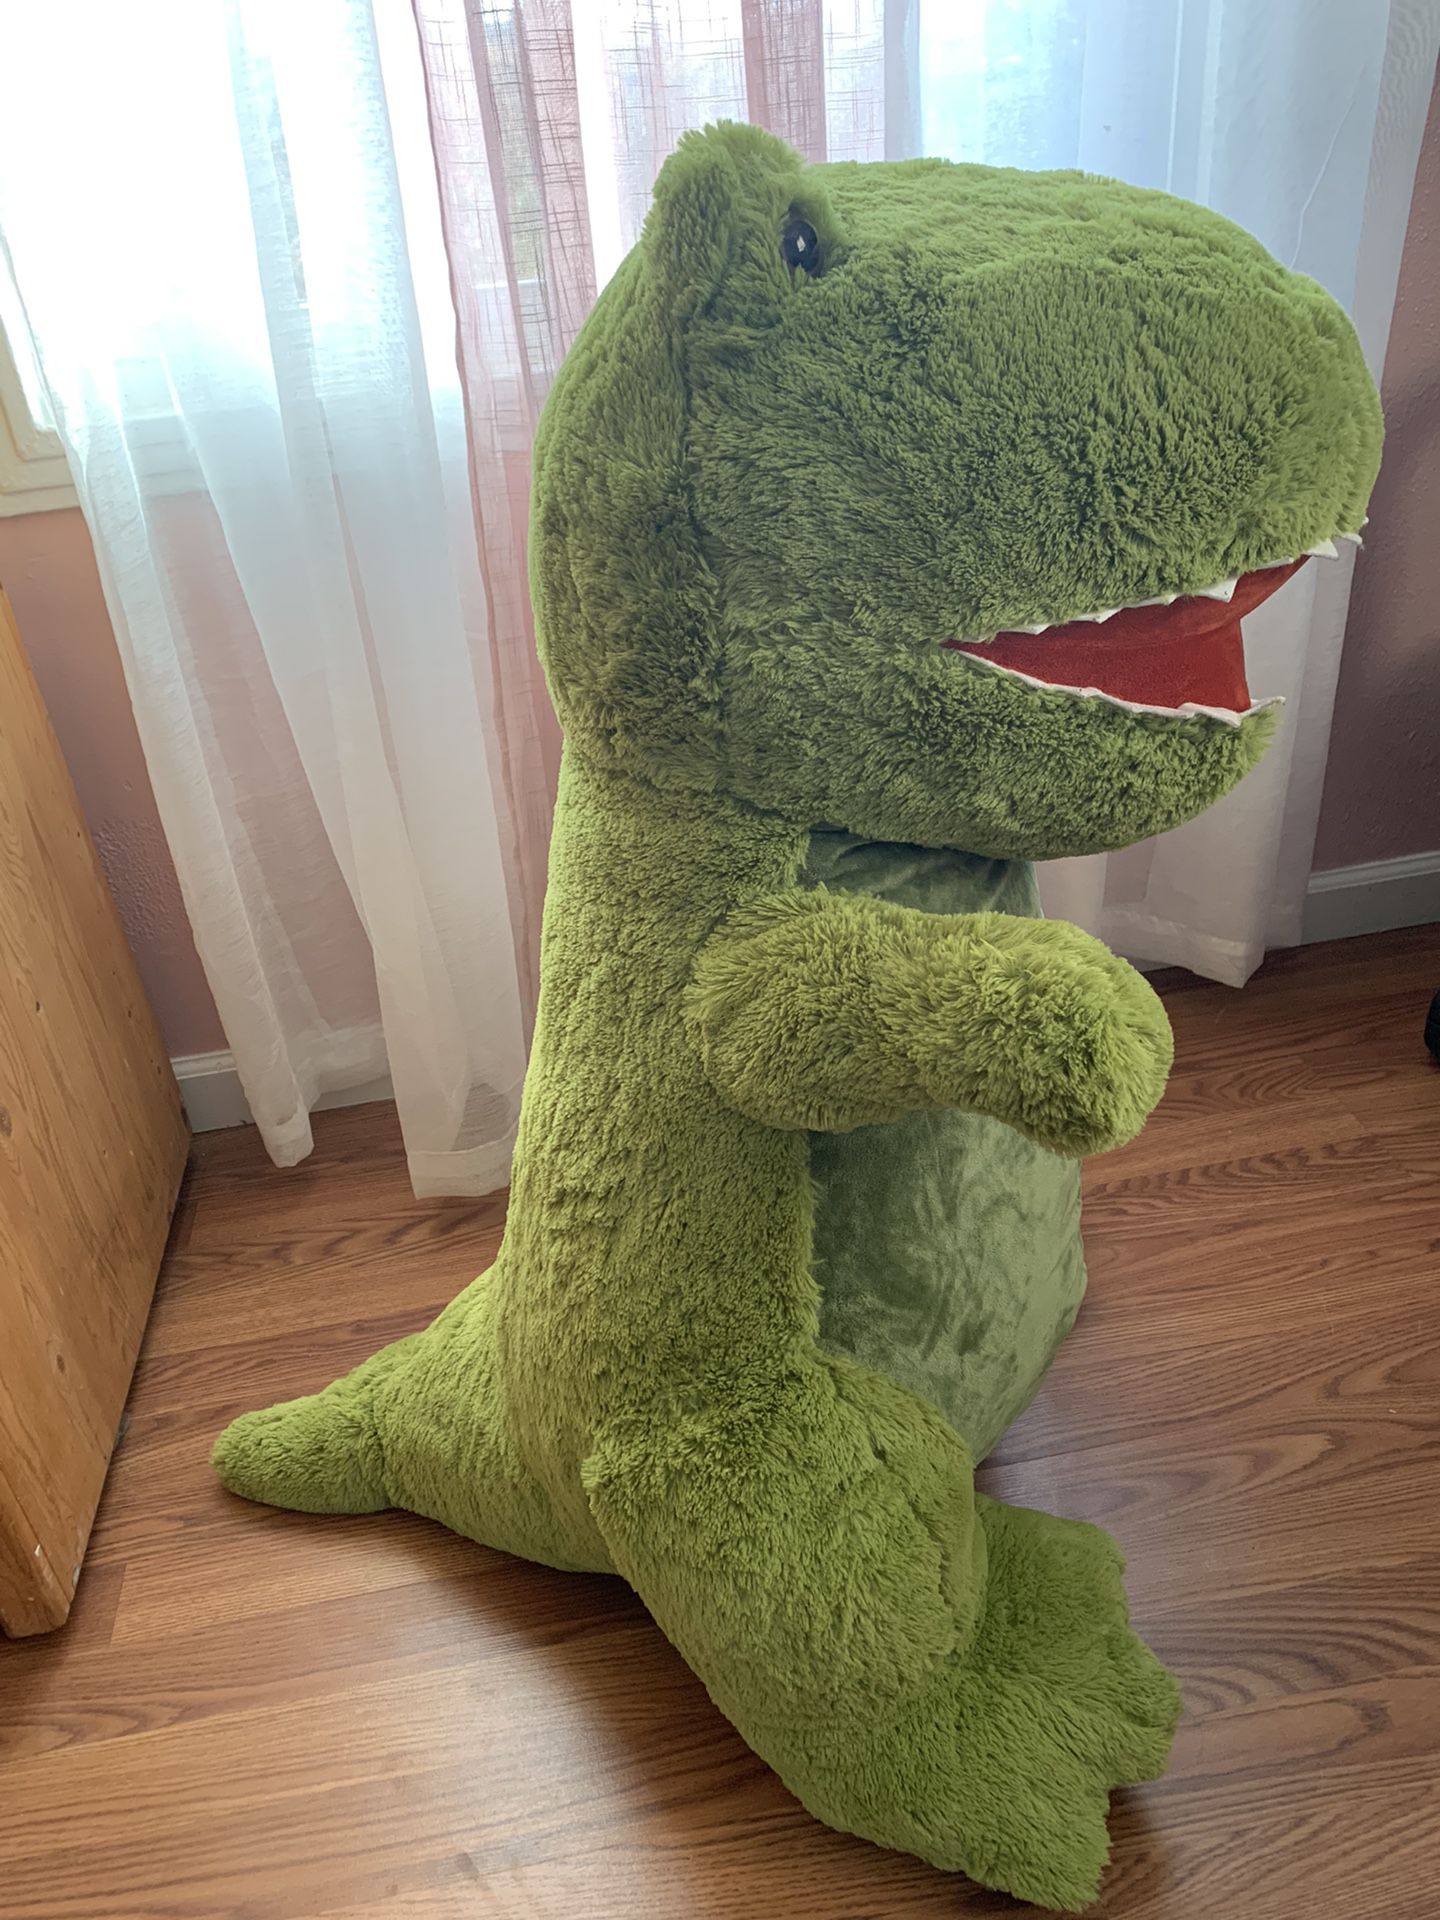 Rugrats Reptar Stuffed animal toy, item will make great gifts or an excellent addition to your collection.